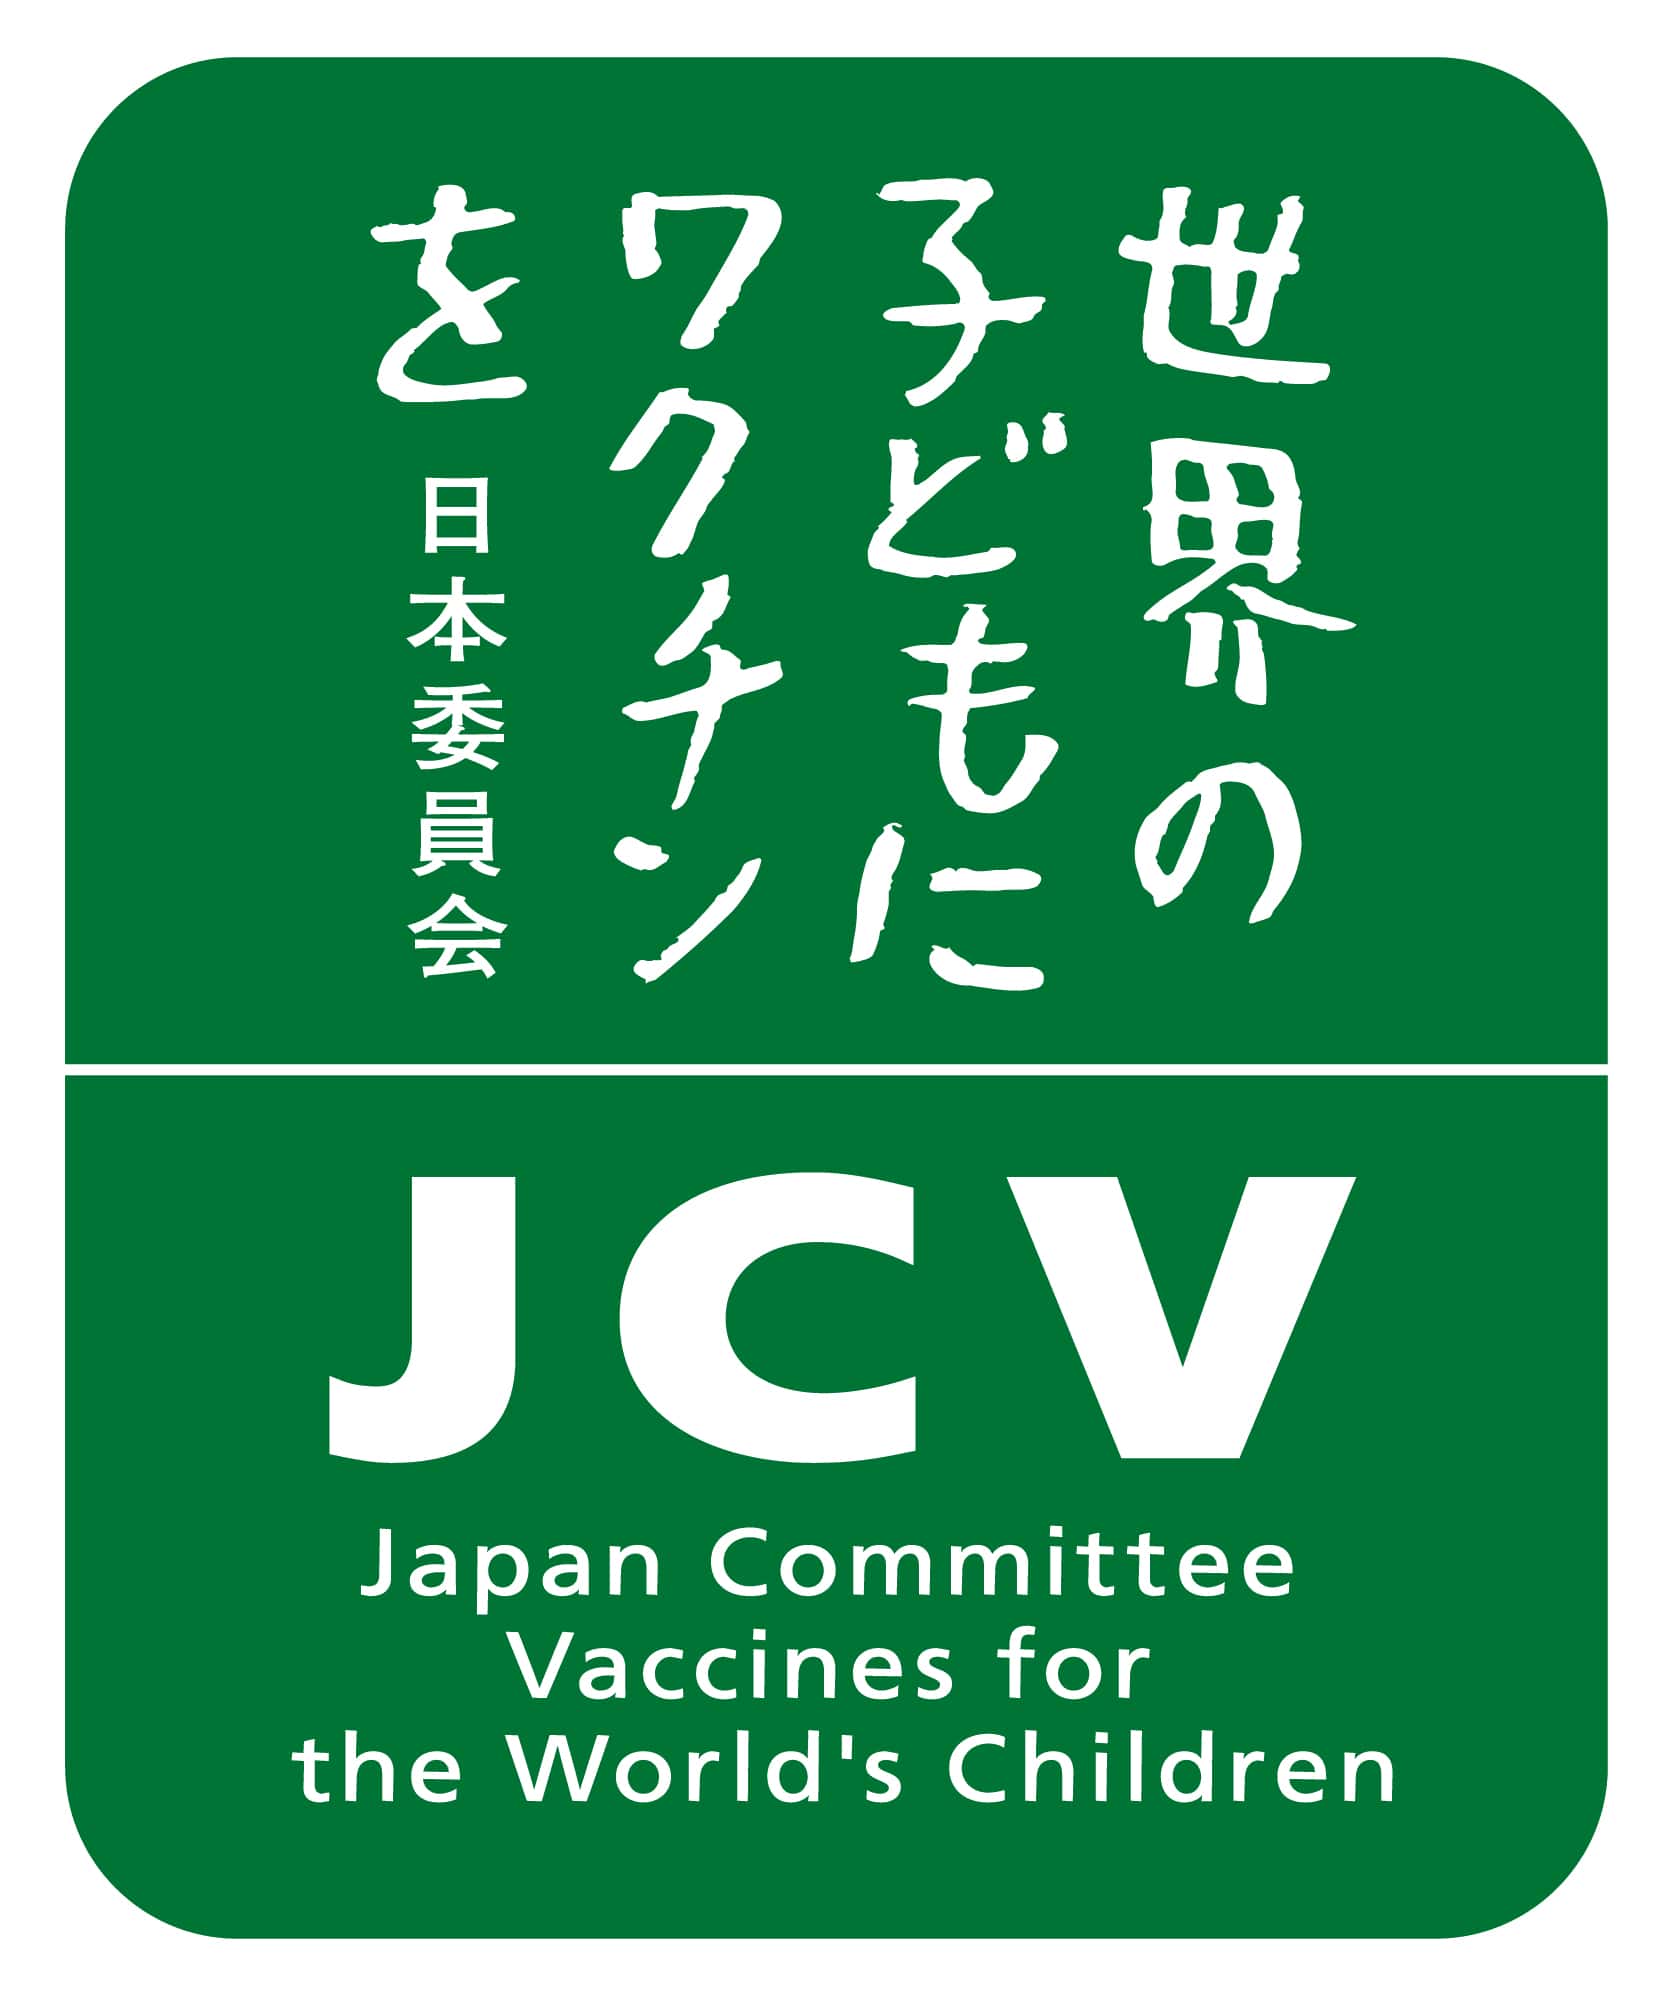 Japan Committee, Vaccines for the World’s Children